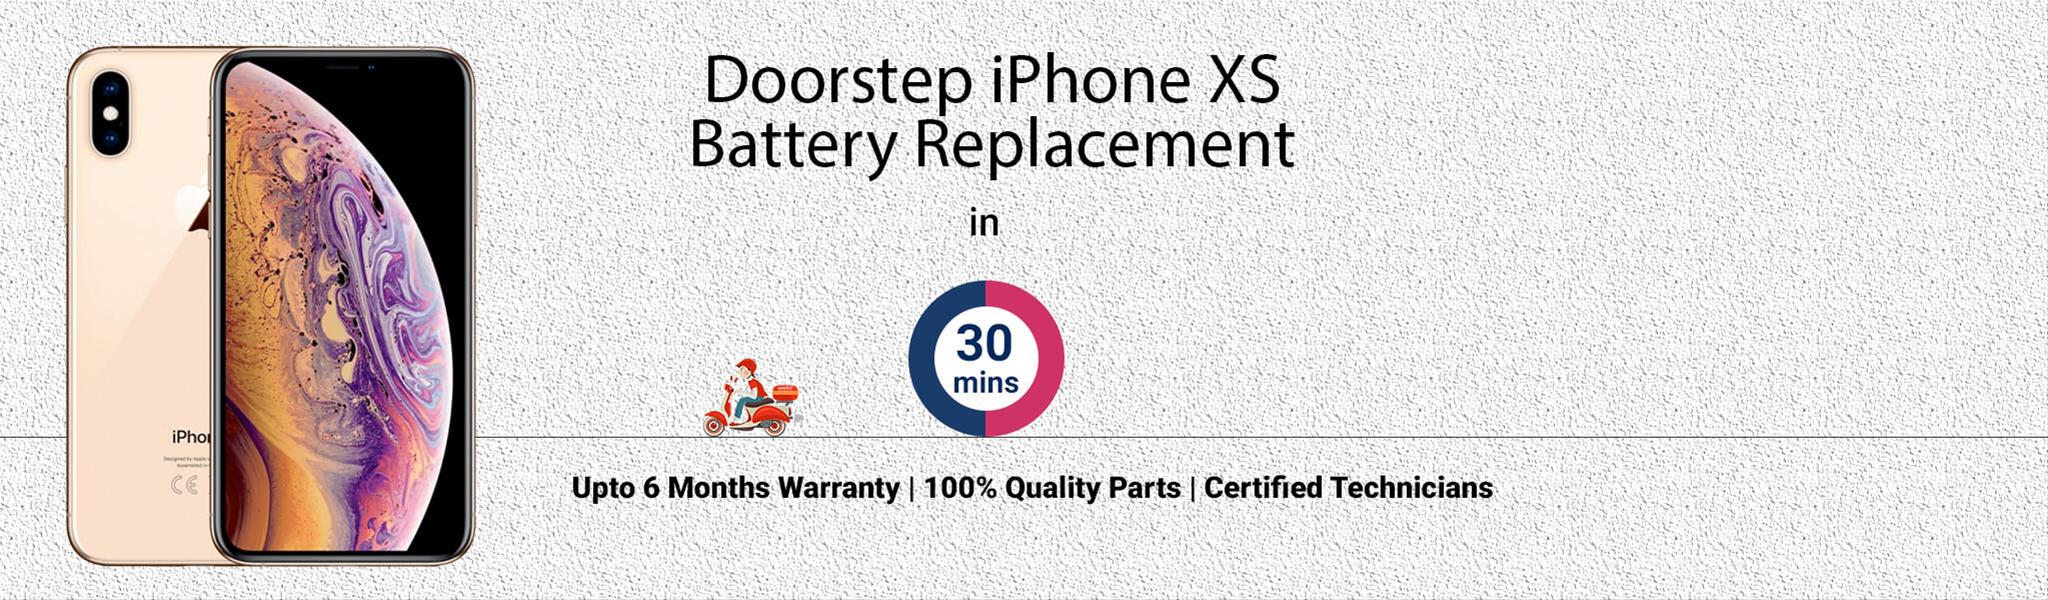 iphone-xs-battery-replacement.jpg